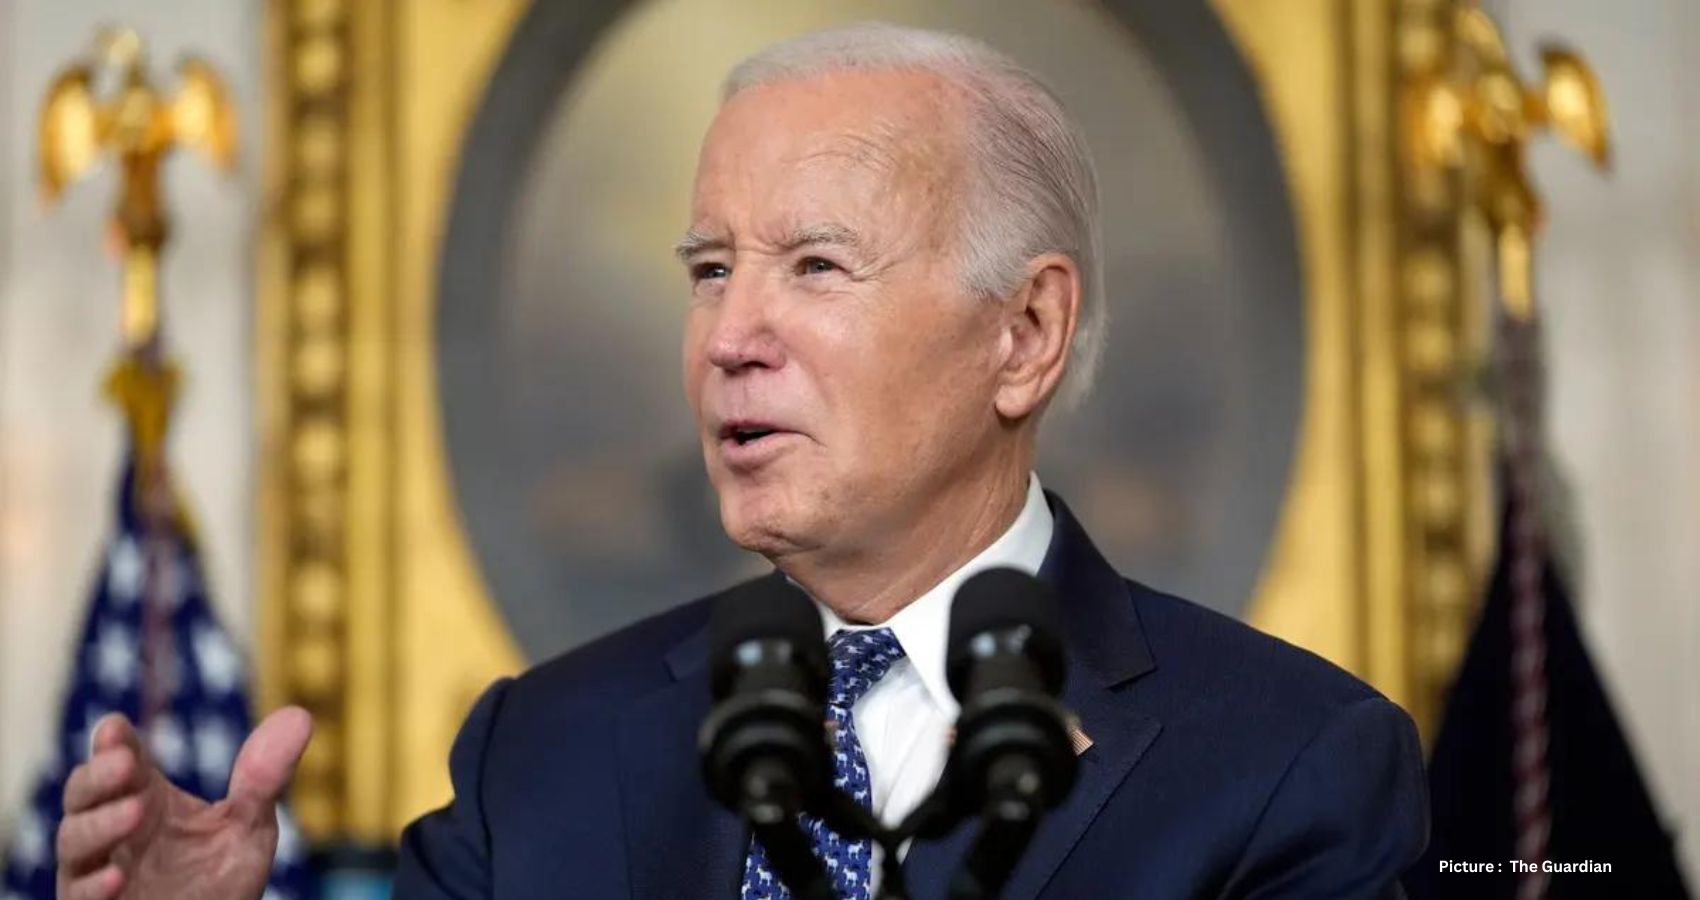 President Biden Defends Memory Amid Mishandling Allegations: Calls Out Investigation’s Intrusions